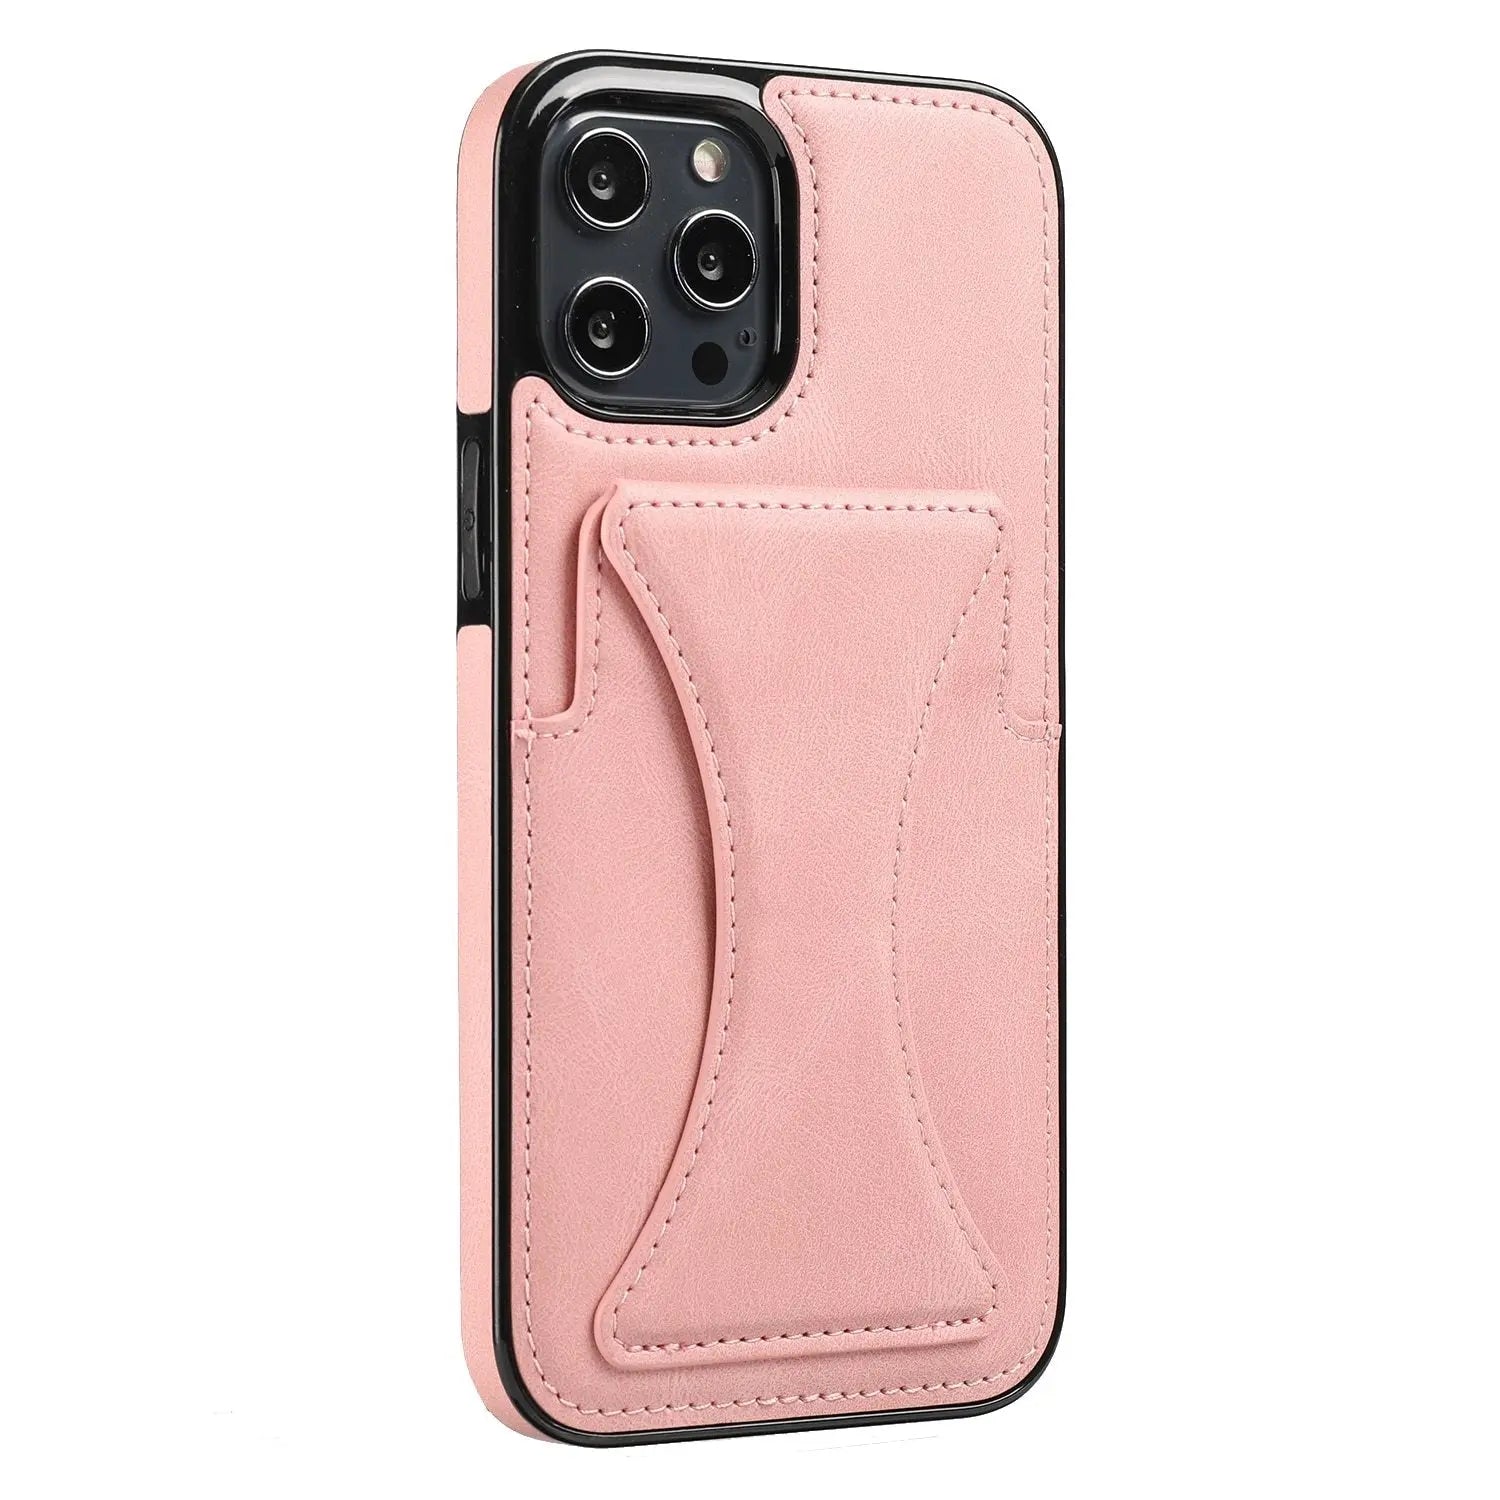 Amare Leather iPhone Case With Card Holder phone case iphone
Samsung cases
OnePlus cases
Huawei cases